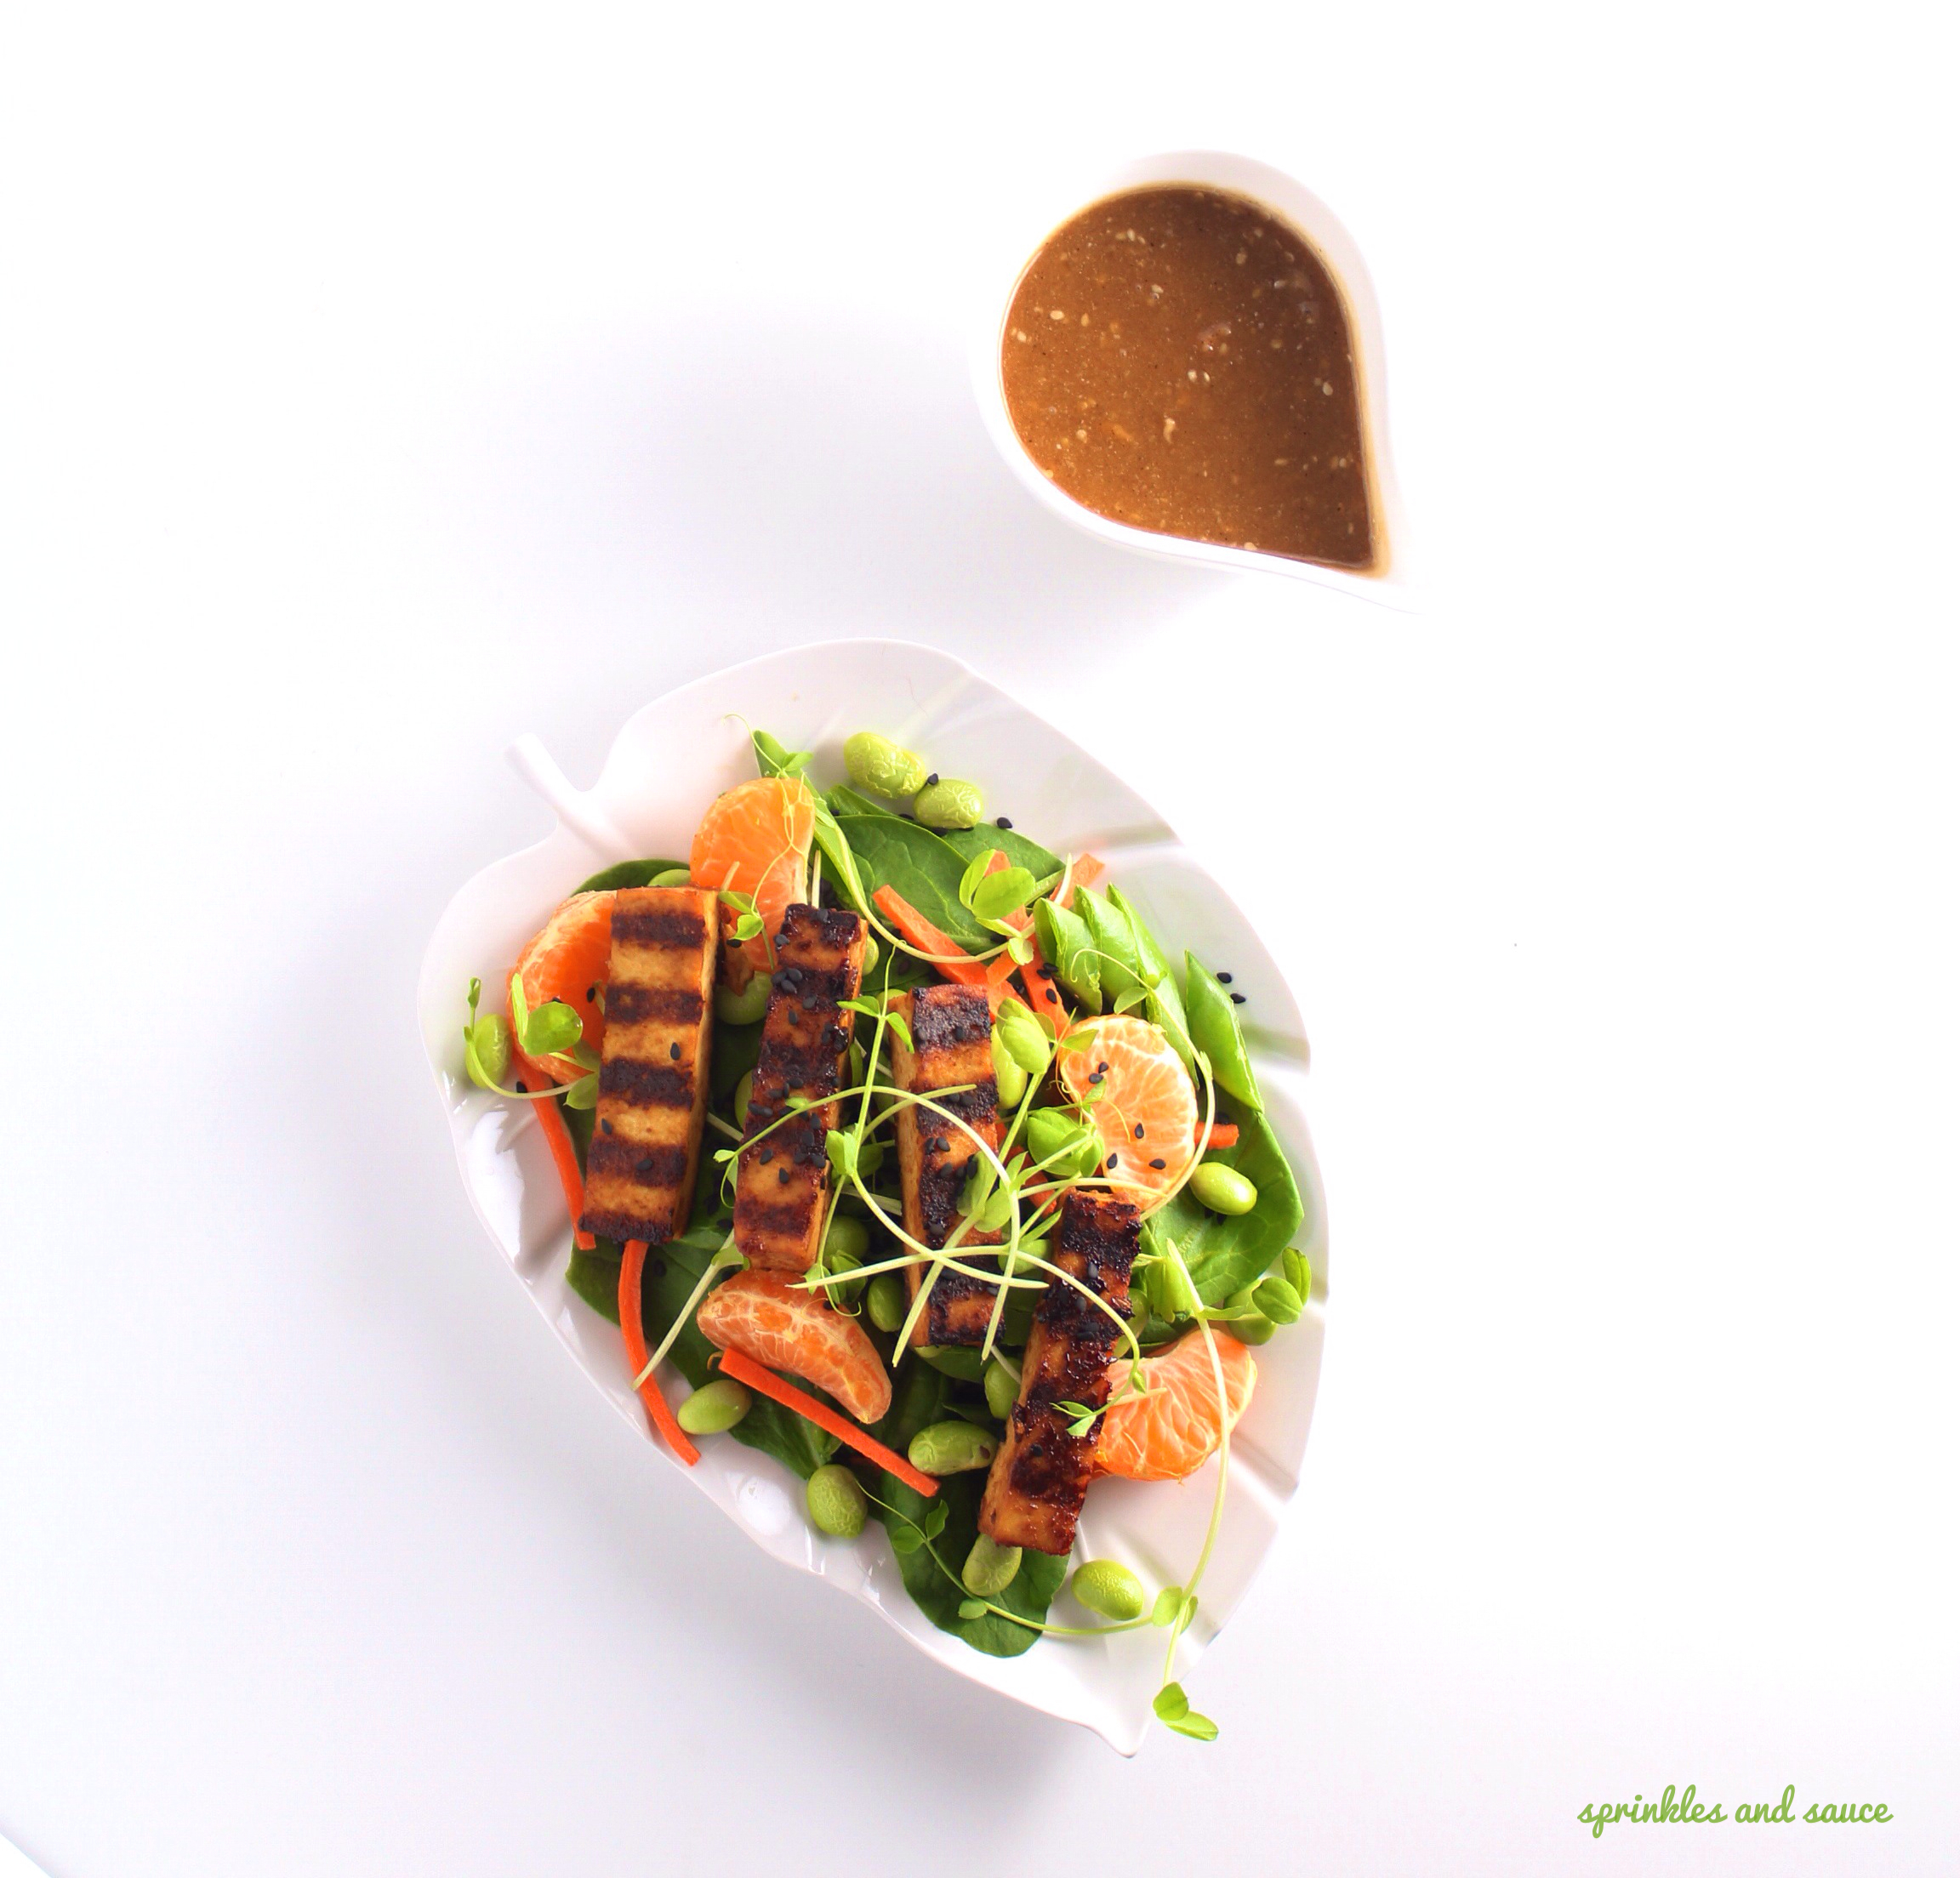 Tofu and Spinach Salad with Asian Sesame Dressing